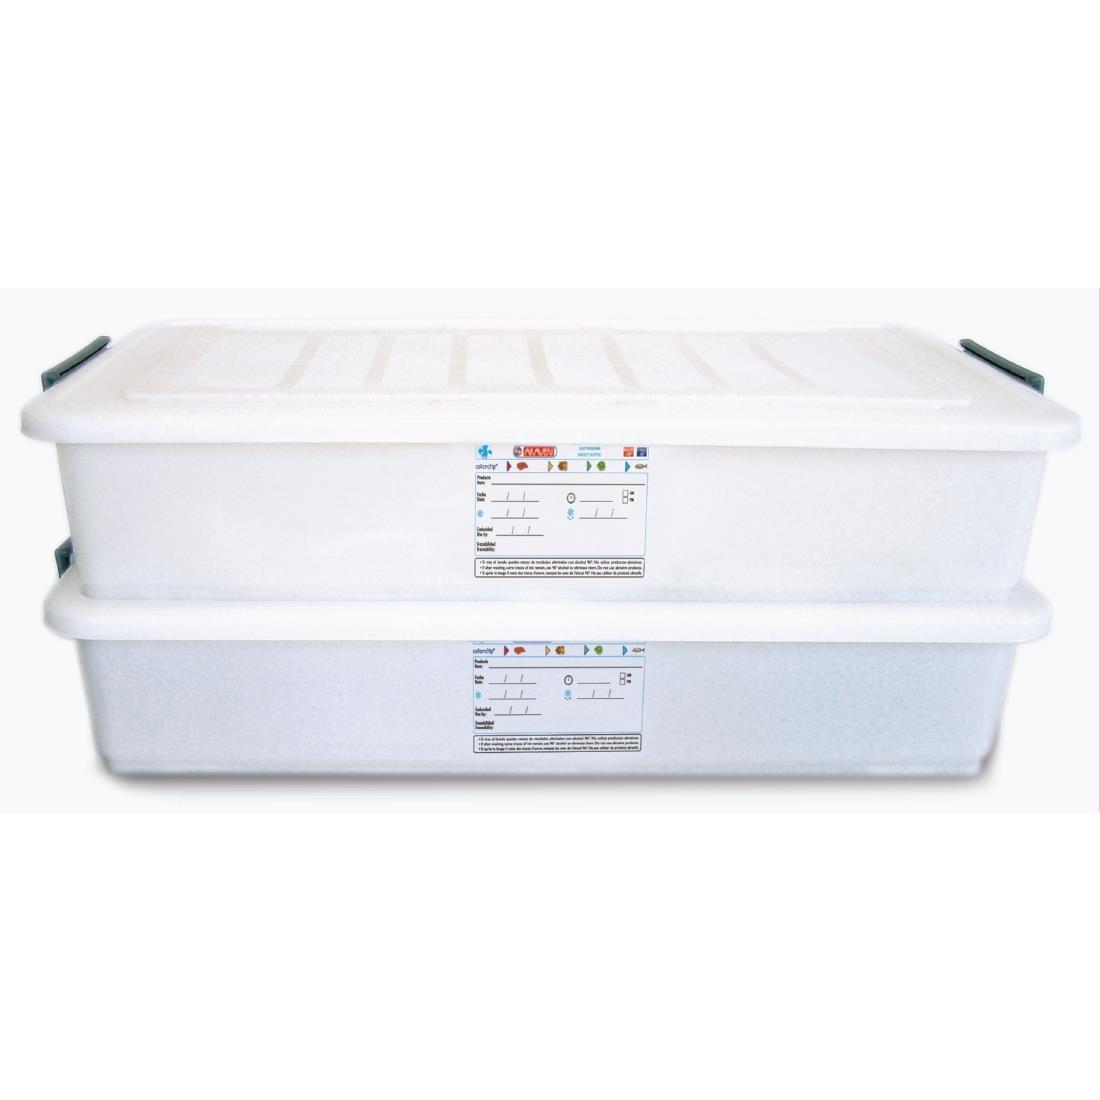 Araven Food Storage Container with Lid 40Ltr - DN910  - 2